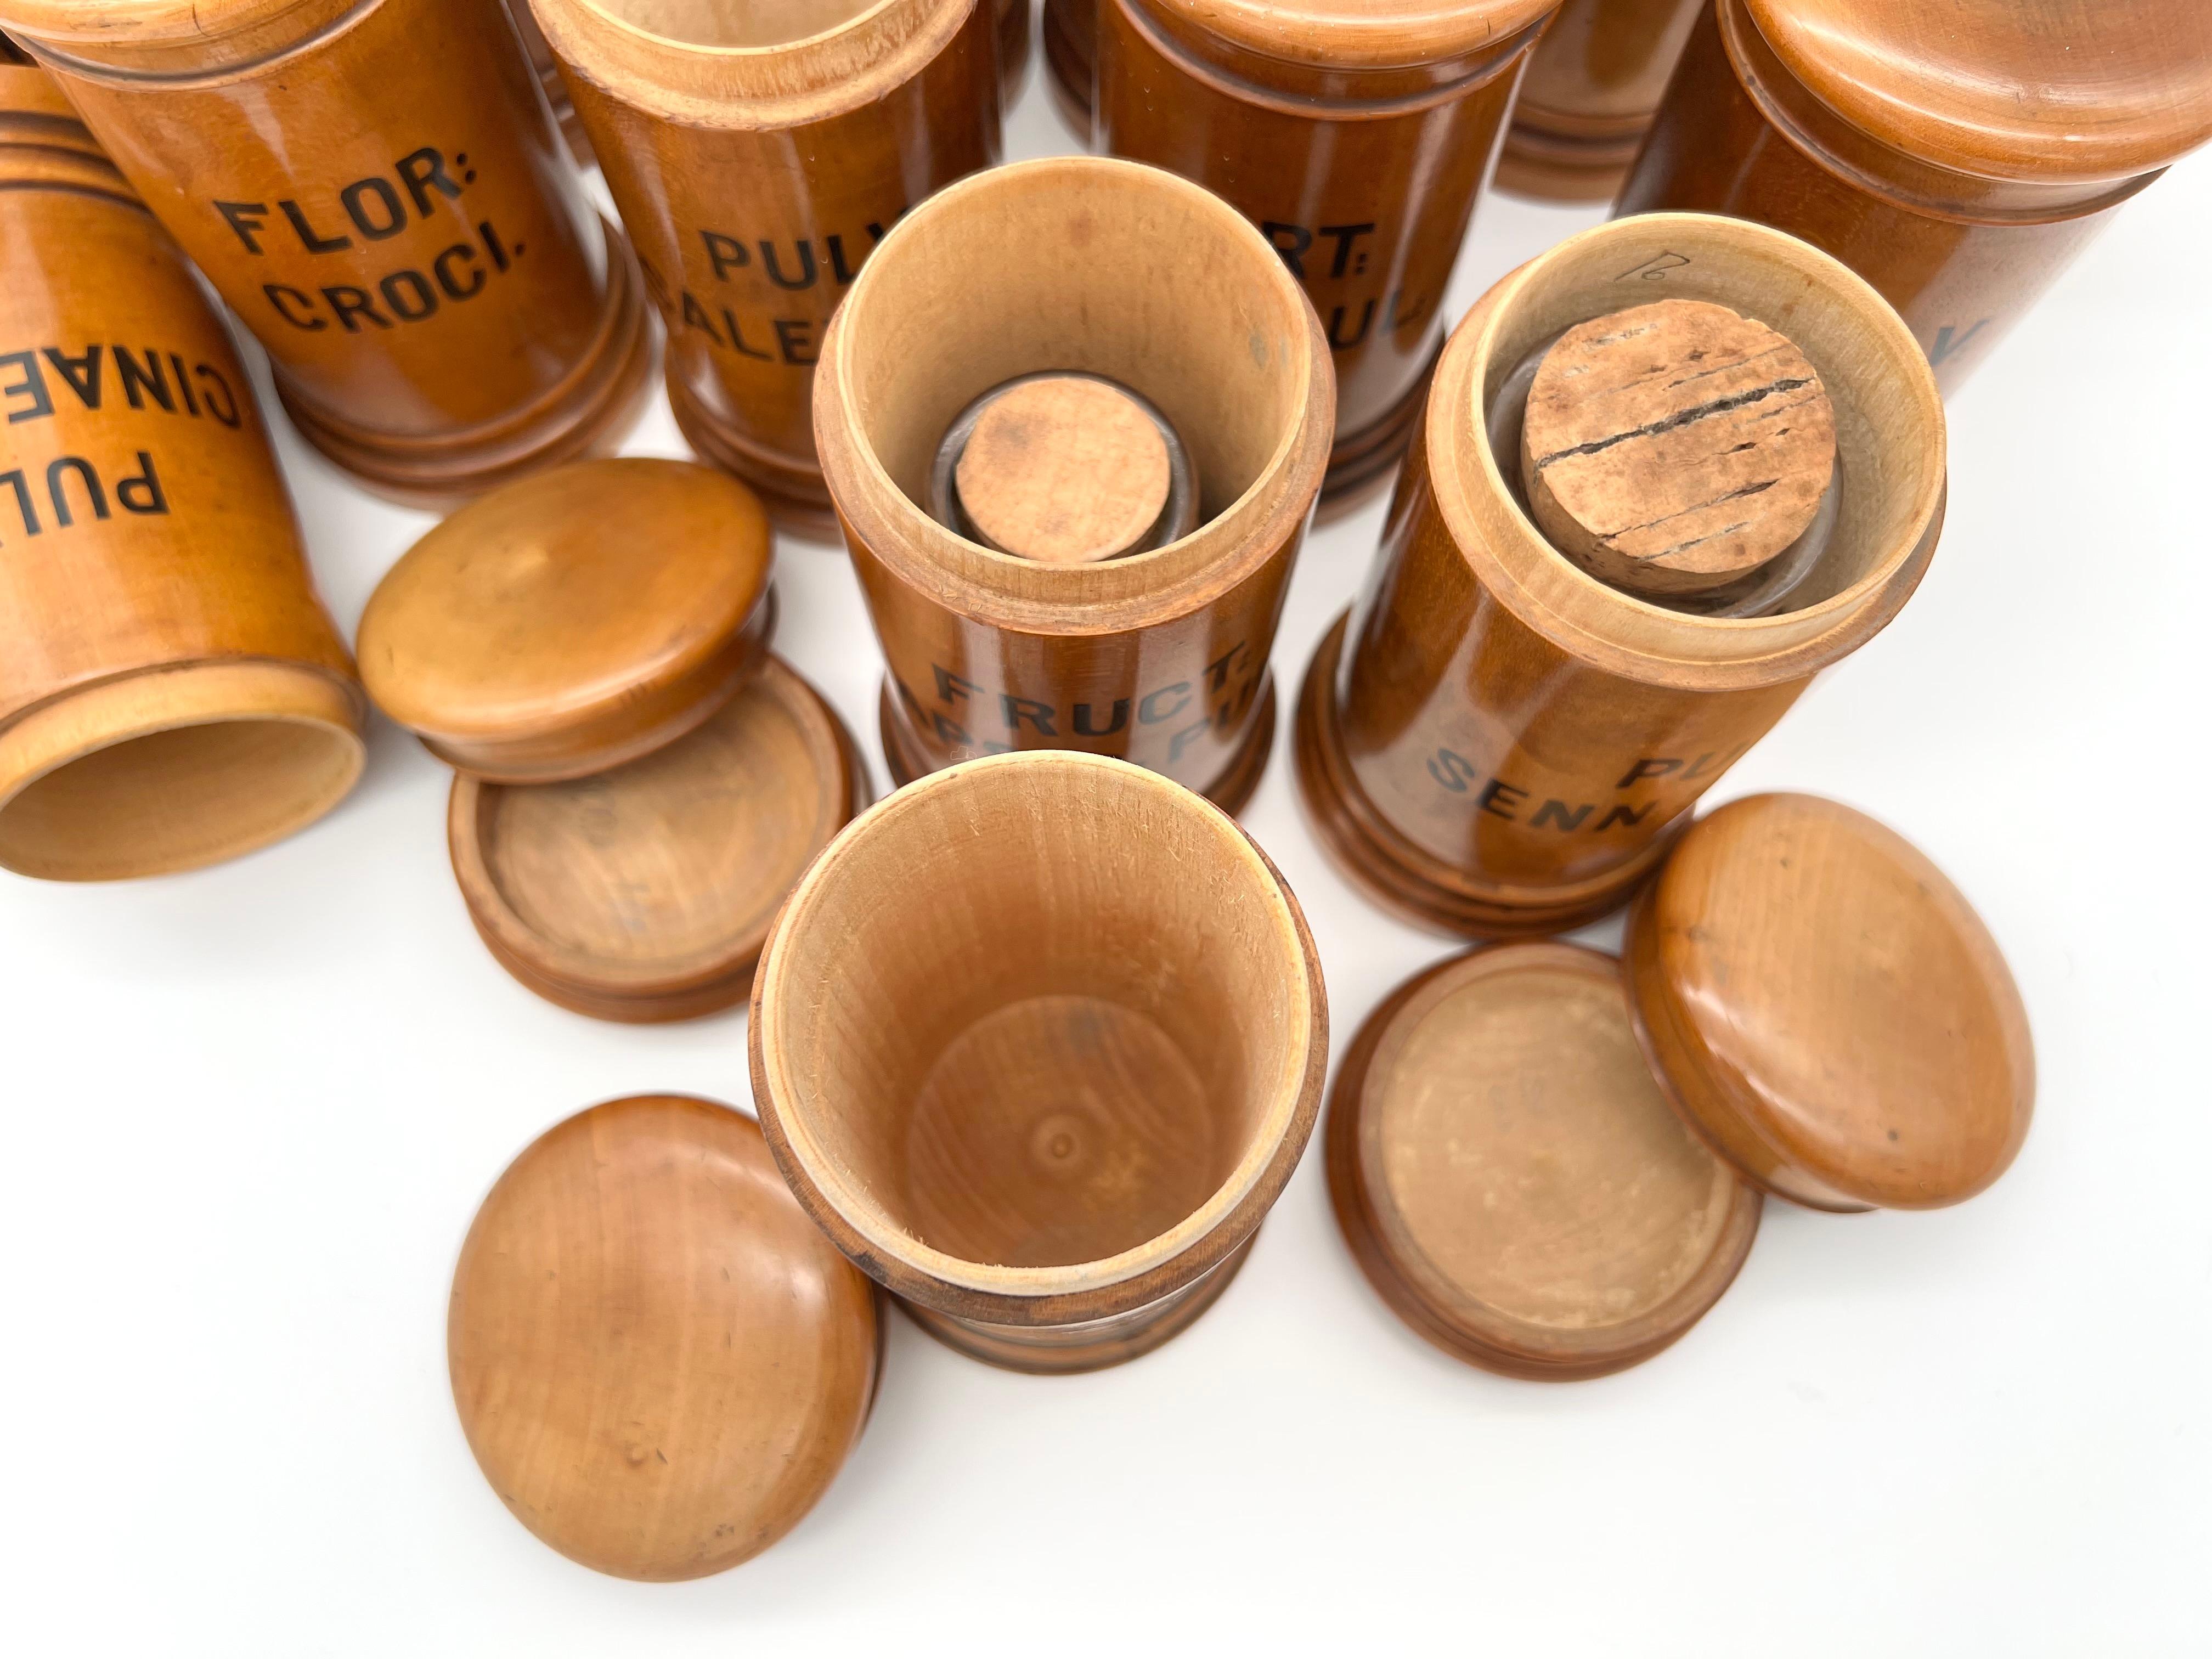 Wooden Viennese pharmacy containers of the late 19th century, in a set of 22 pieces. 

The containers with lids are made of boxwood and printed with the names of various spices in Latin.

They are in generally good condition and have a wonderful